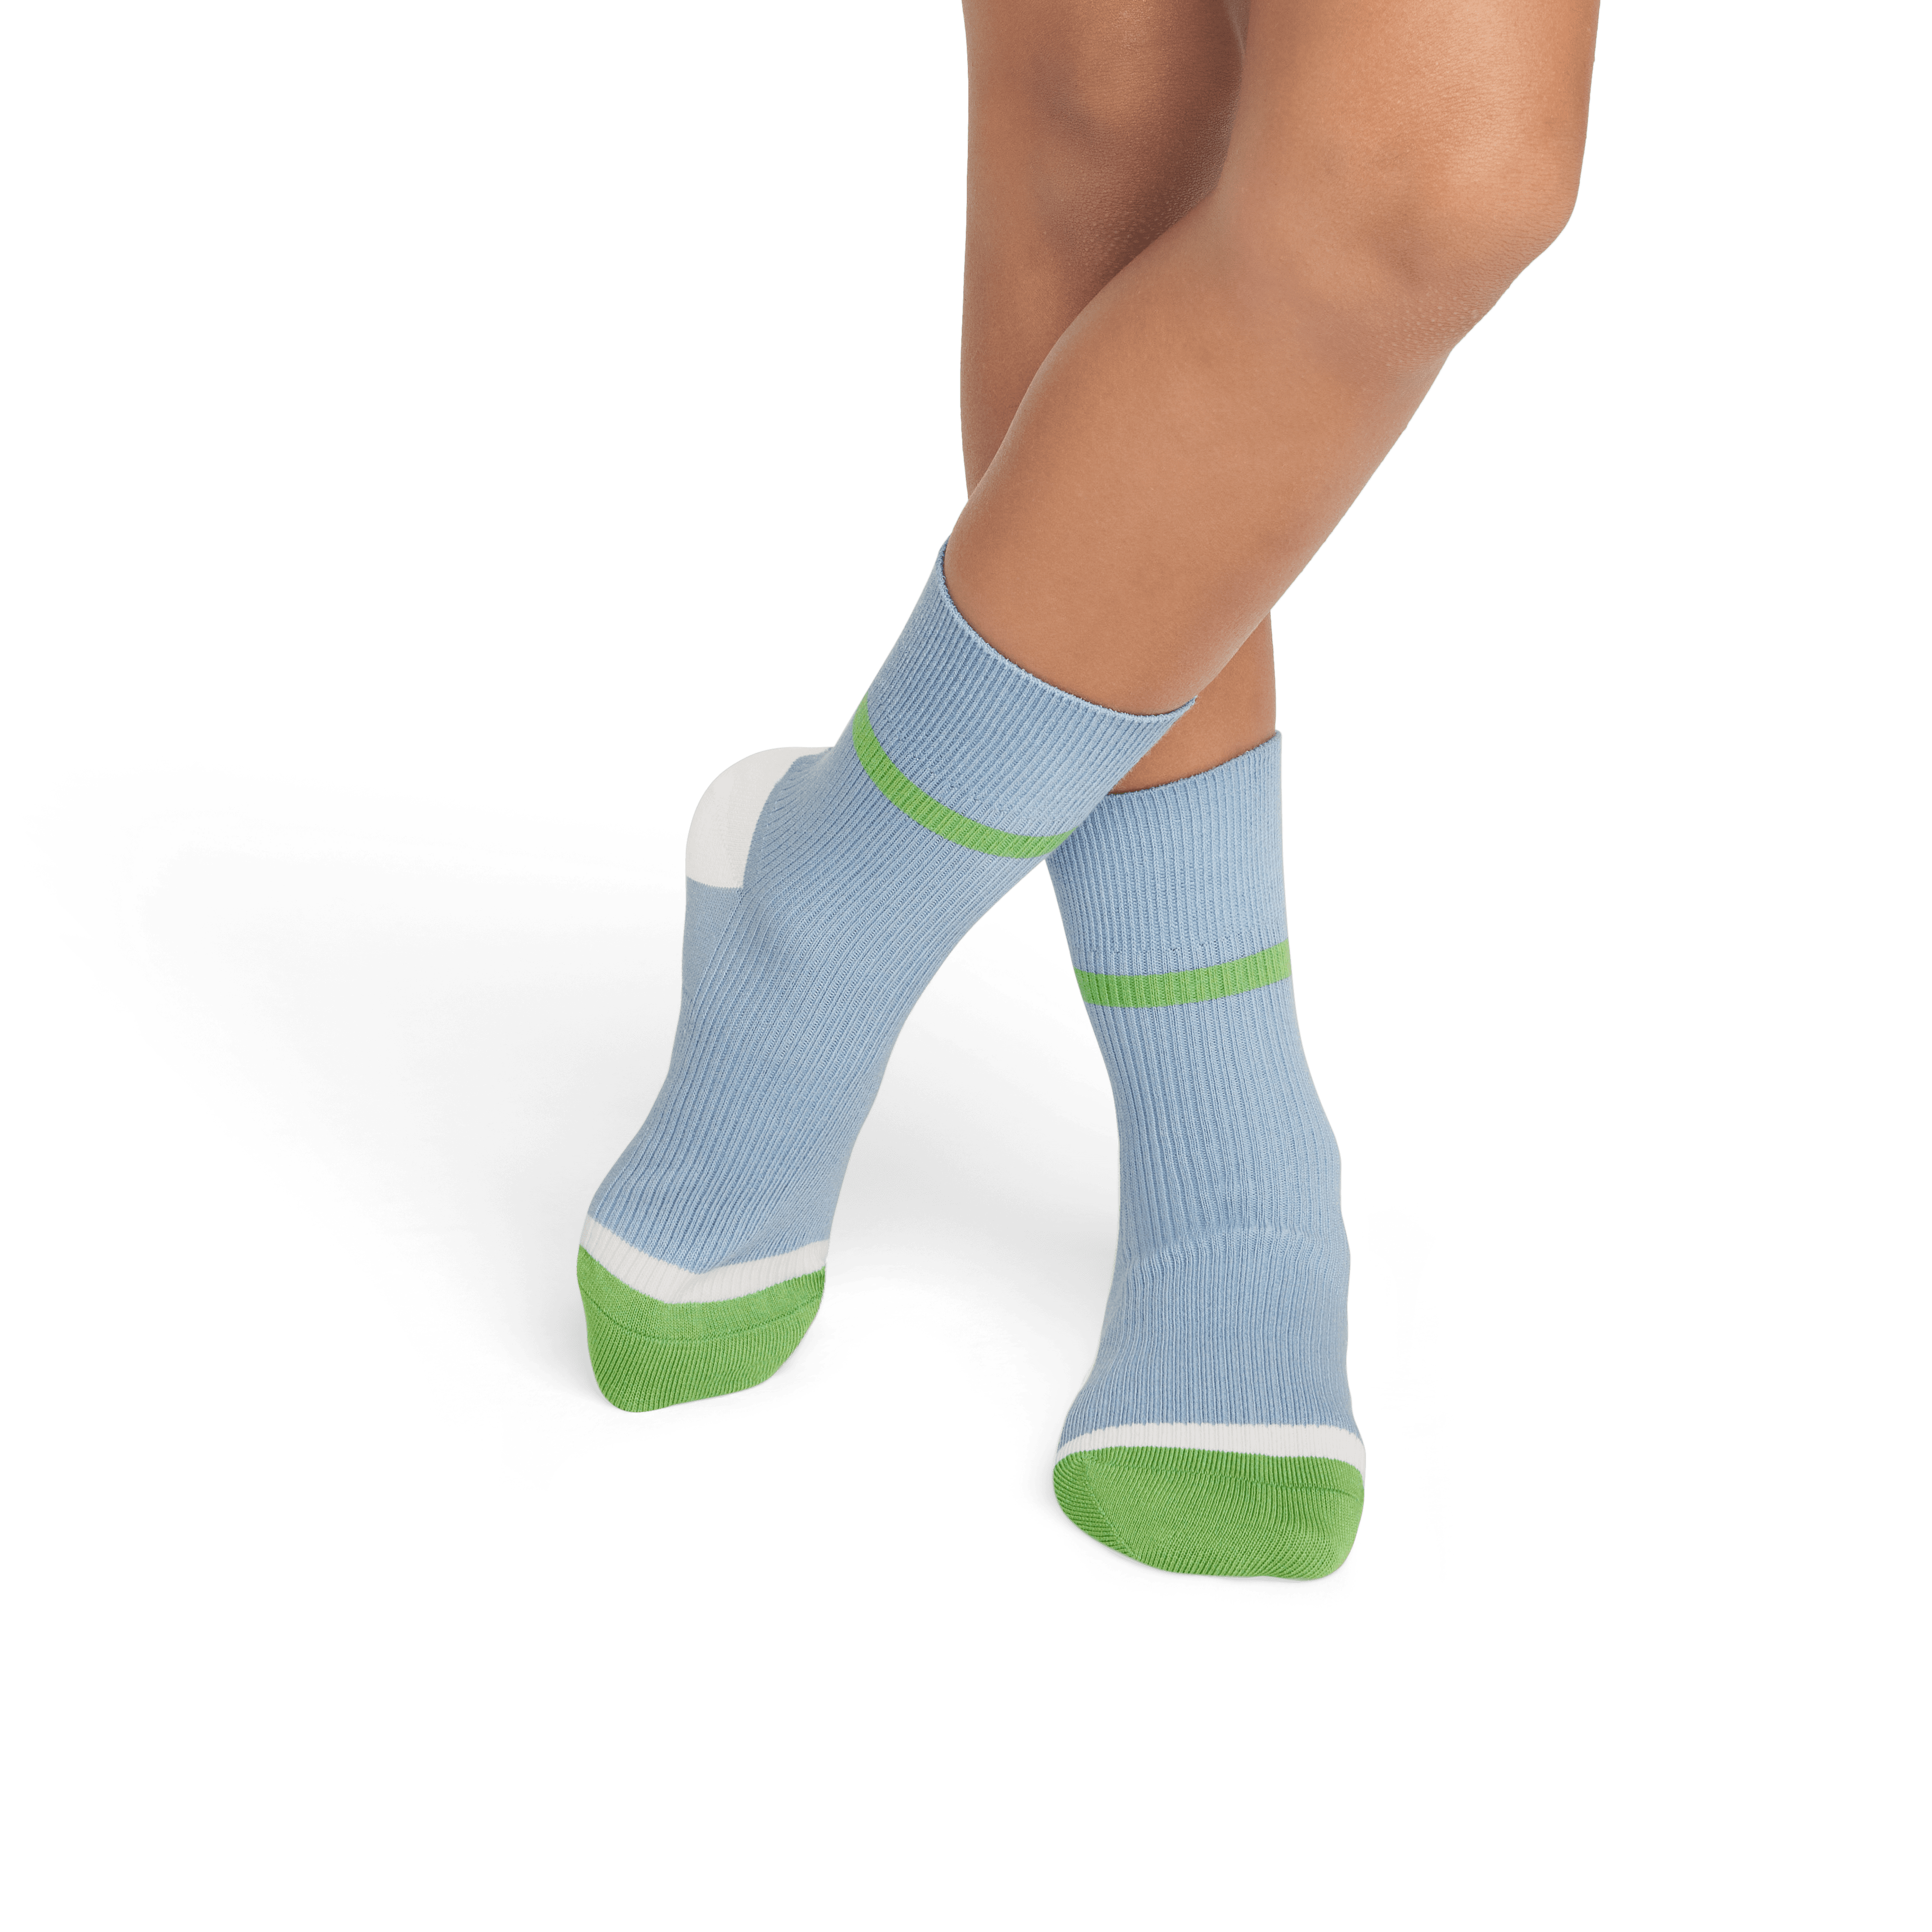 4 Pack of Mid-Calf Ribbed Socks with arch support for School